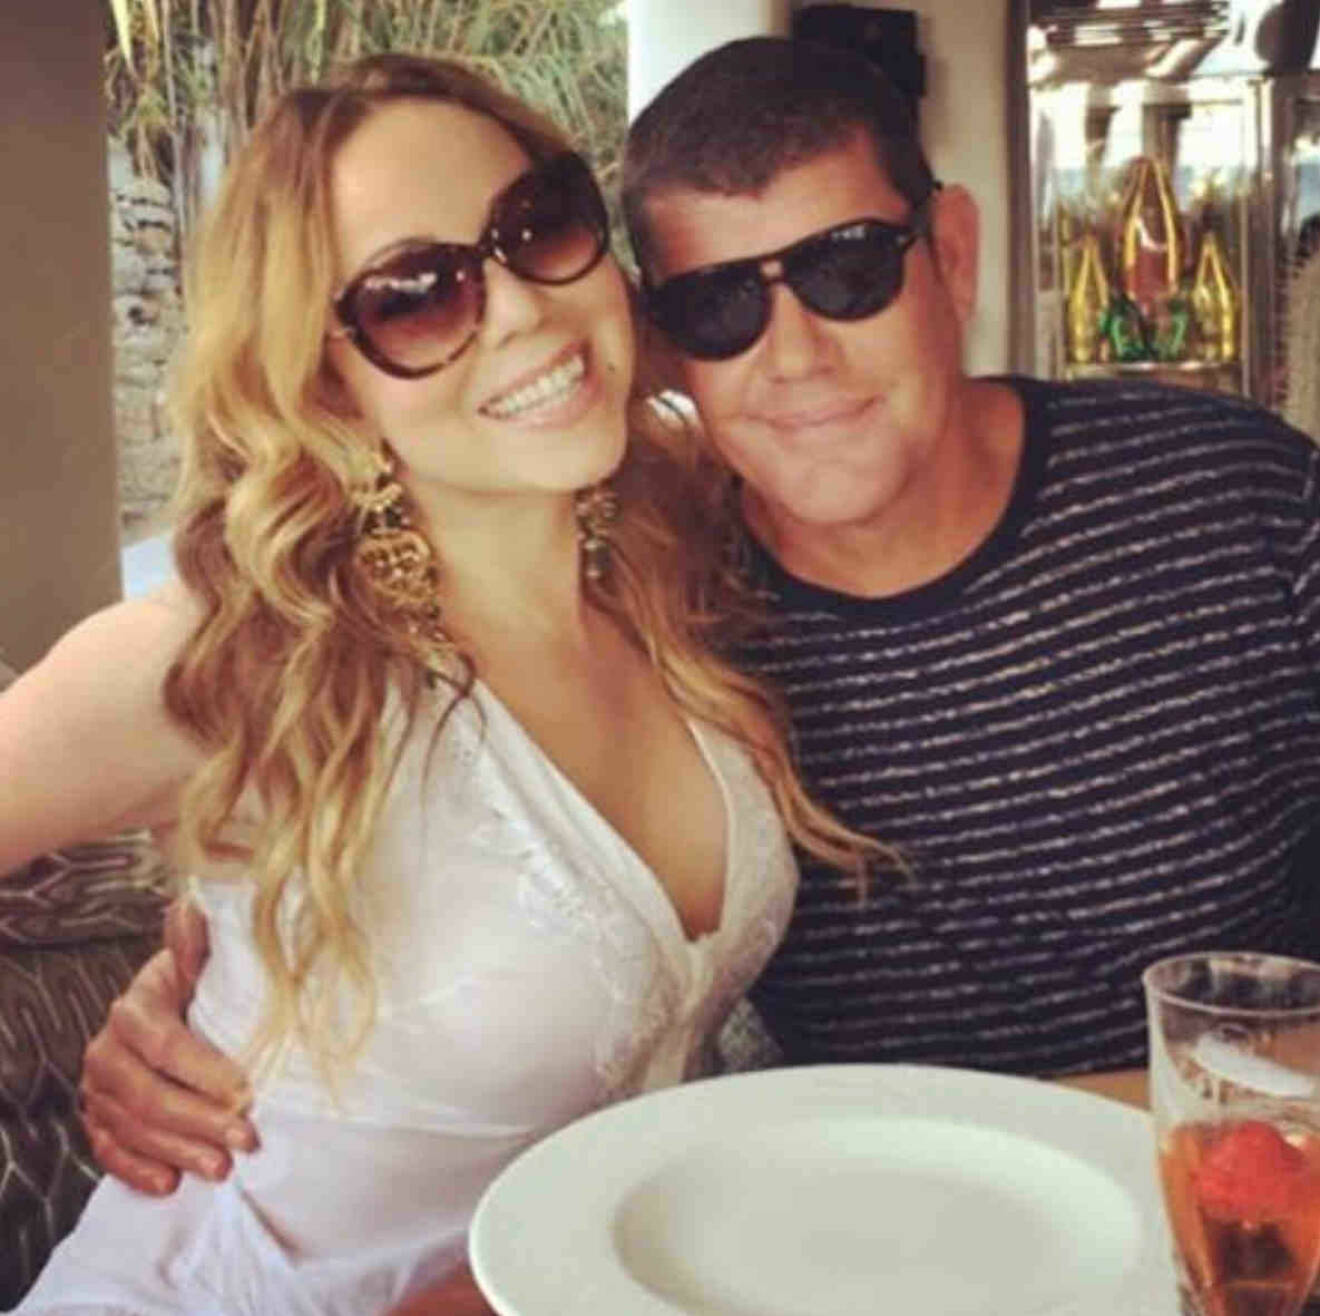 EROTEME.CO.UK FOR UK SALES: Contact Caroline 44 207 431 1598 Picture shows: Mariah Carey & James Packer NON-EXCLUSIVE: Thursday 22nd September 2016 Job: 160922UT3 London, UK EROTEME.CO.UK 44 207 431 1598 Disclaimer note of Eroteme Ltd: Eroteme Ltd does not claim copyright for this image. This image is merely a supply image and payment will be on supply/usage fee only. IBL